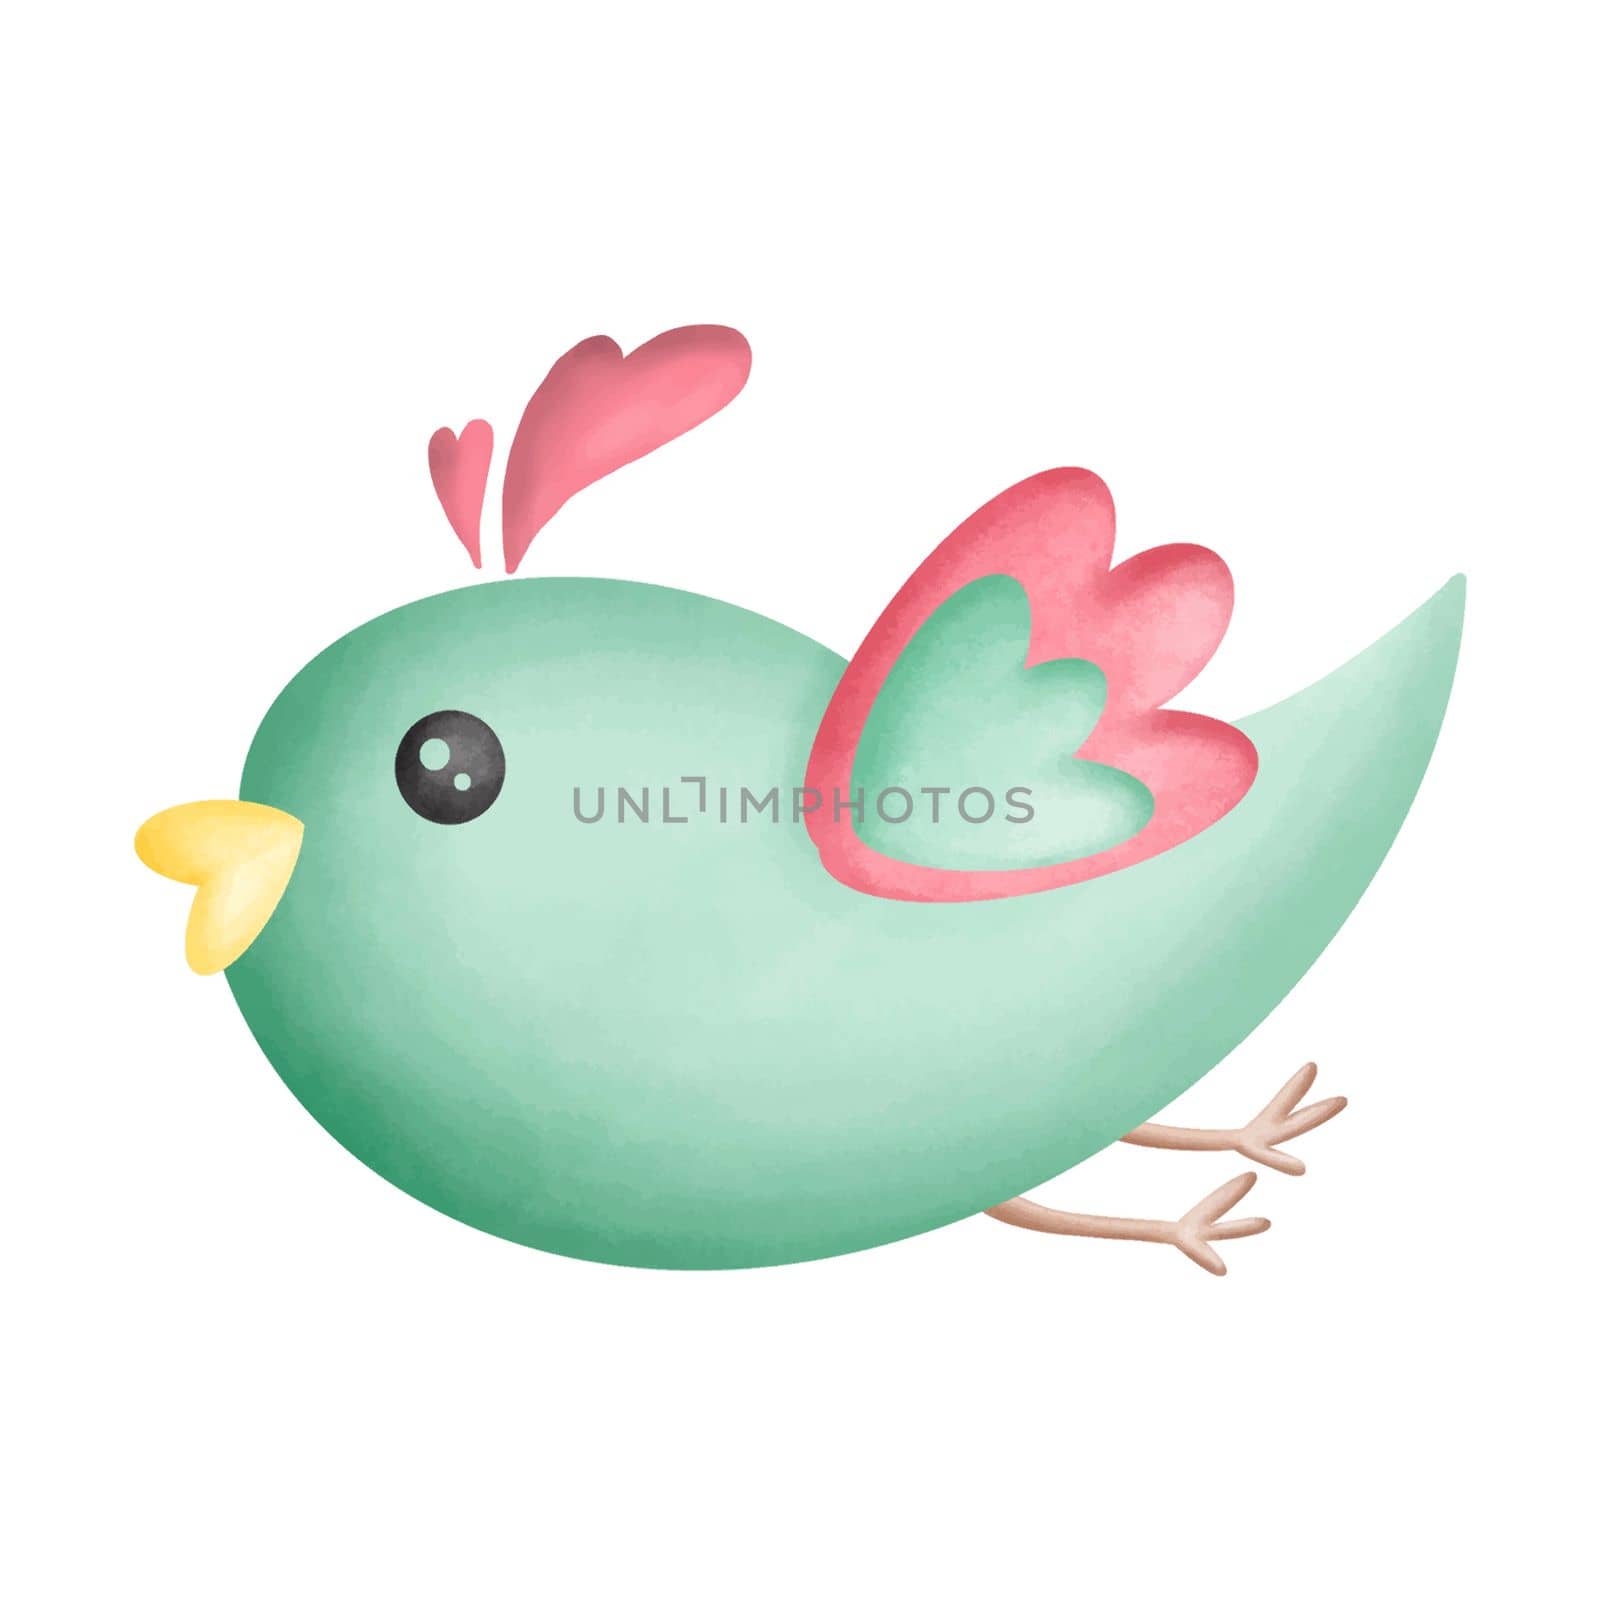 Lime Green Love Bird Cute Watercolor Clipart PNG. Paris In Love collection with lovely green bird for romantic design element, love art, wedding watercolor illustration.